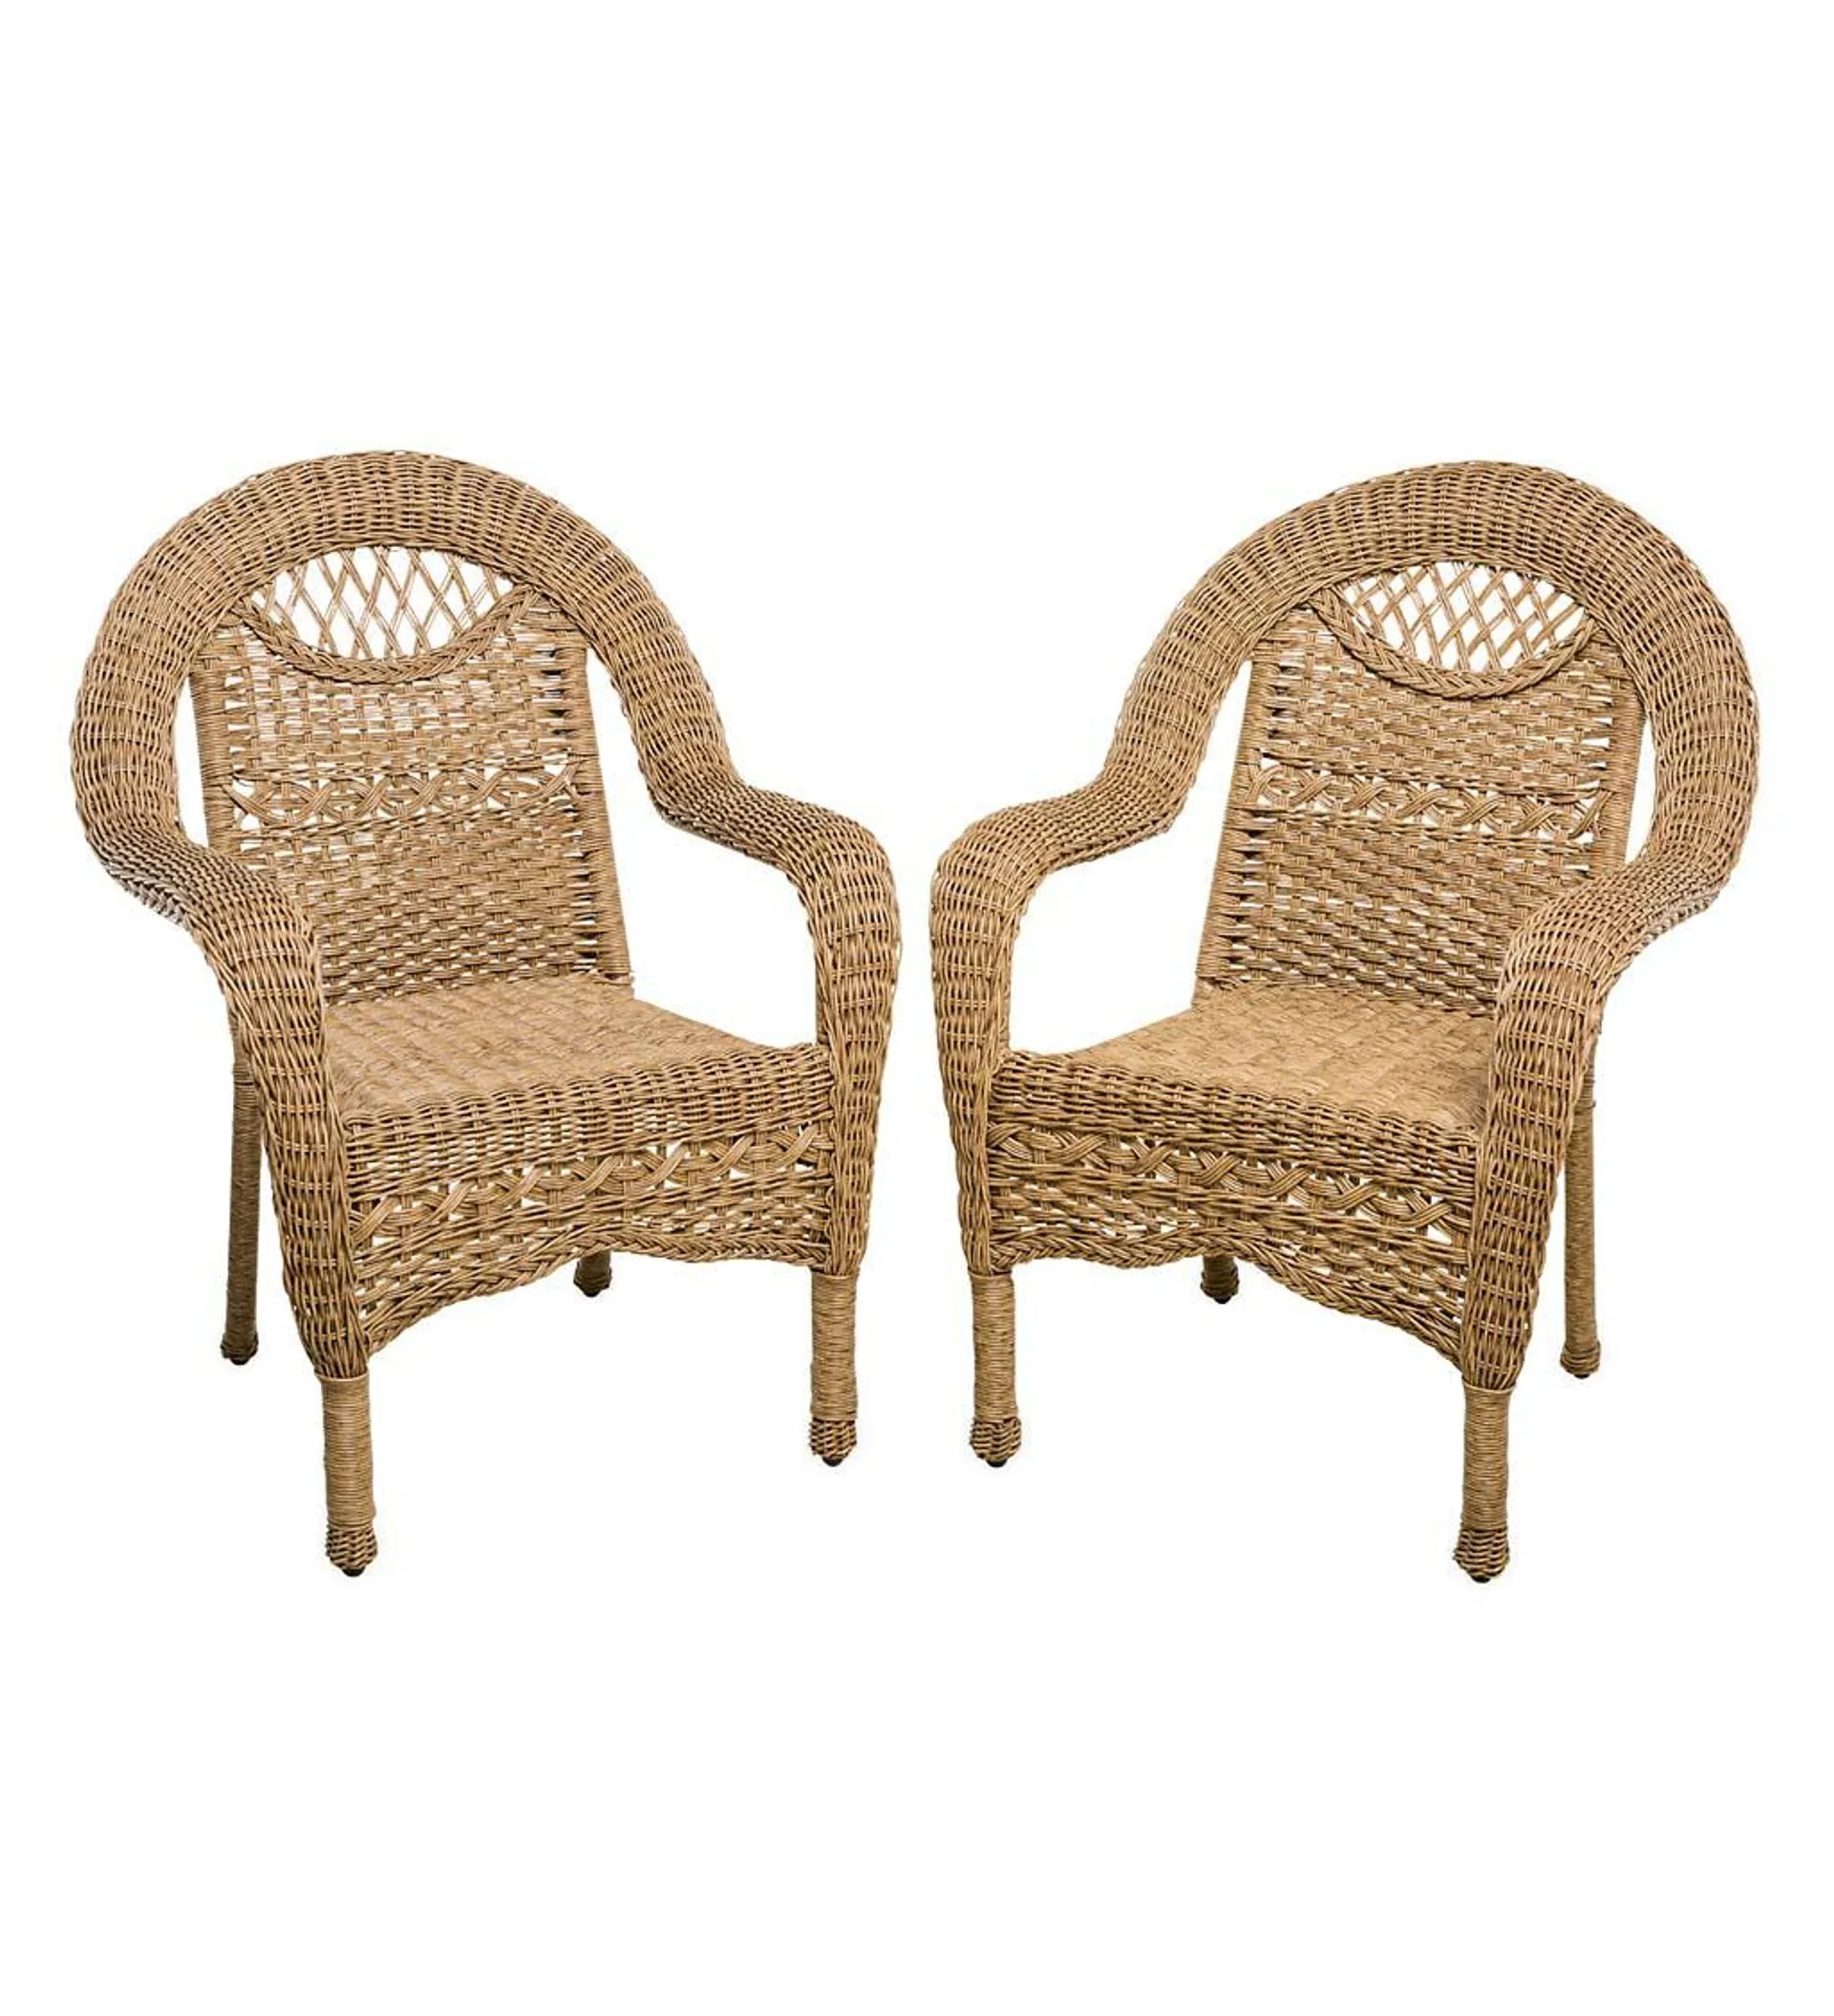 Prospect Hill Wicker Chairs, Set of 2 - Driftwood